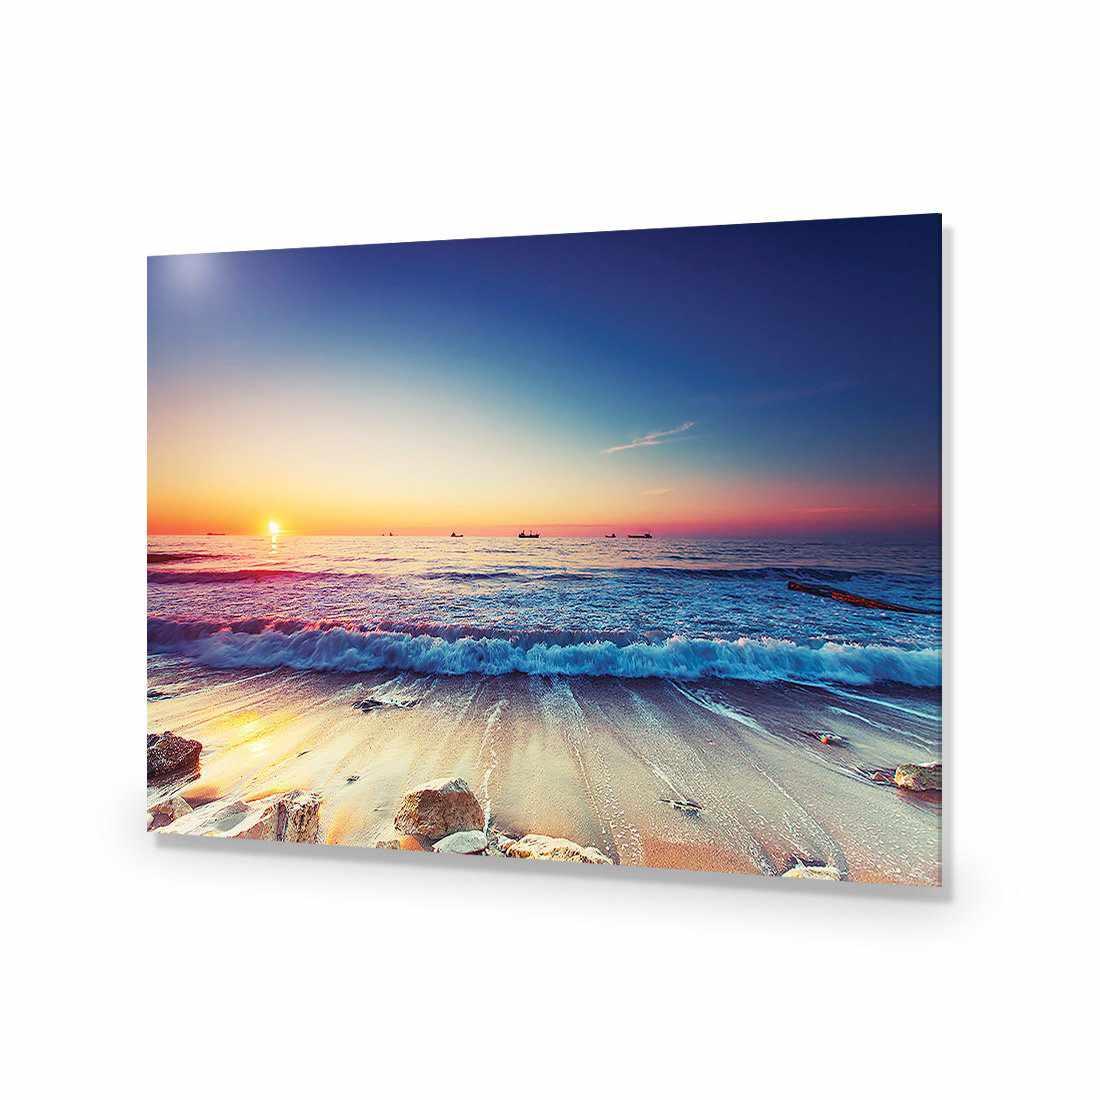 High Tide Sunset-Acrylic-Wall Art Design-Without Border-Acrylic - No Frame-45x30cm-Wall Art Designs